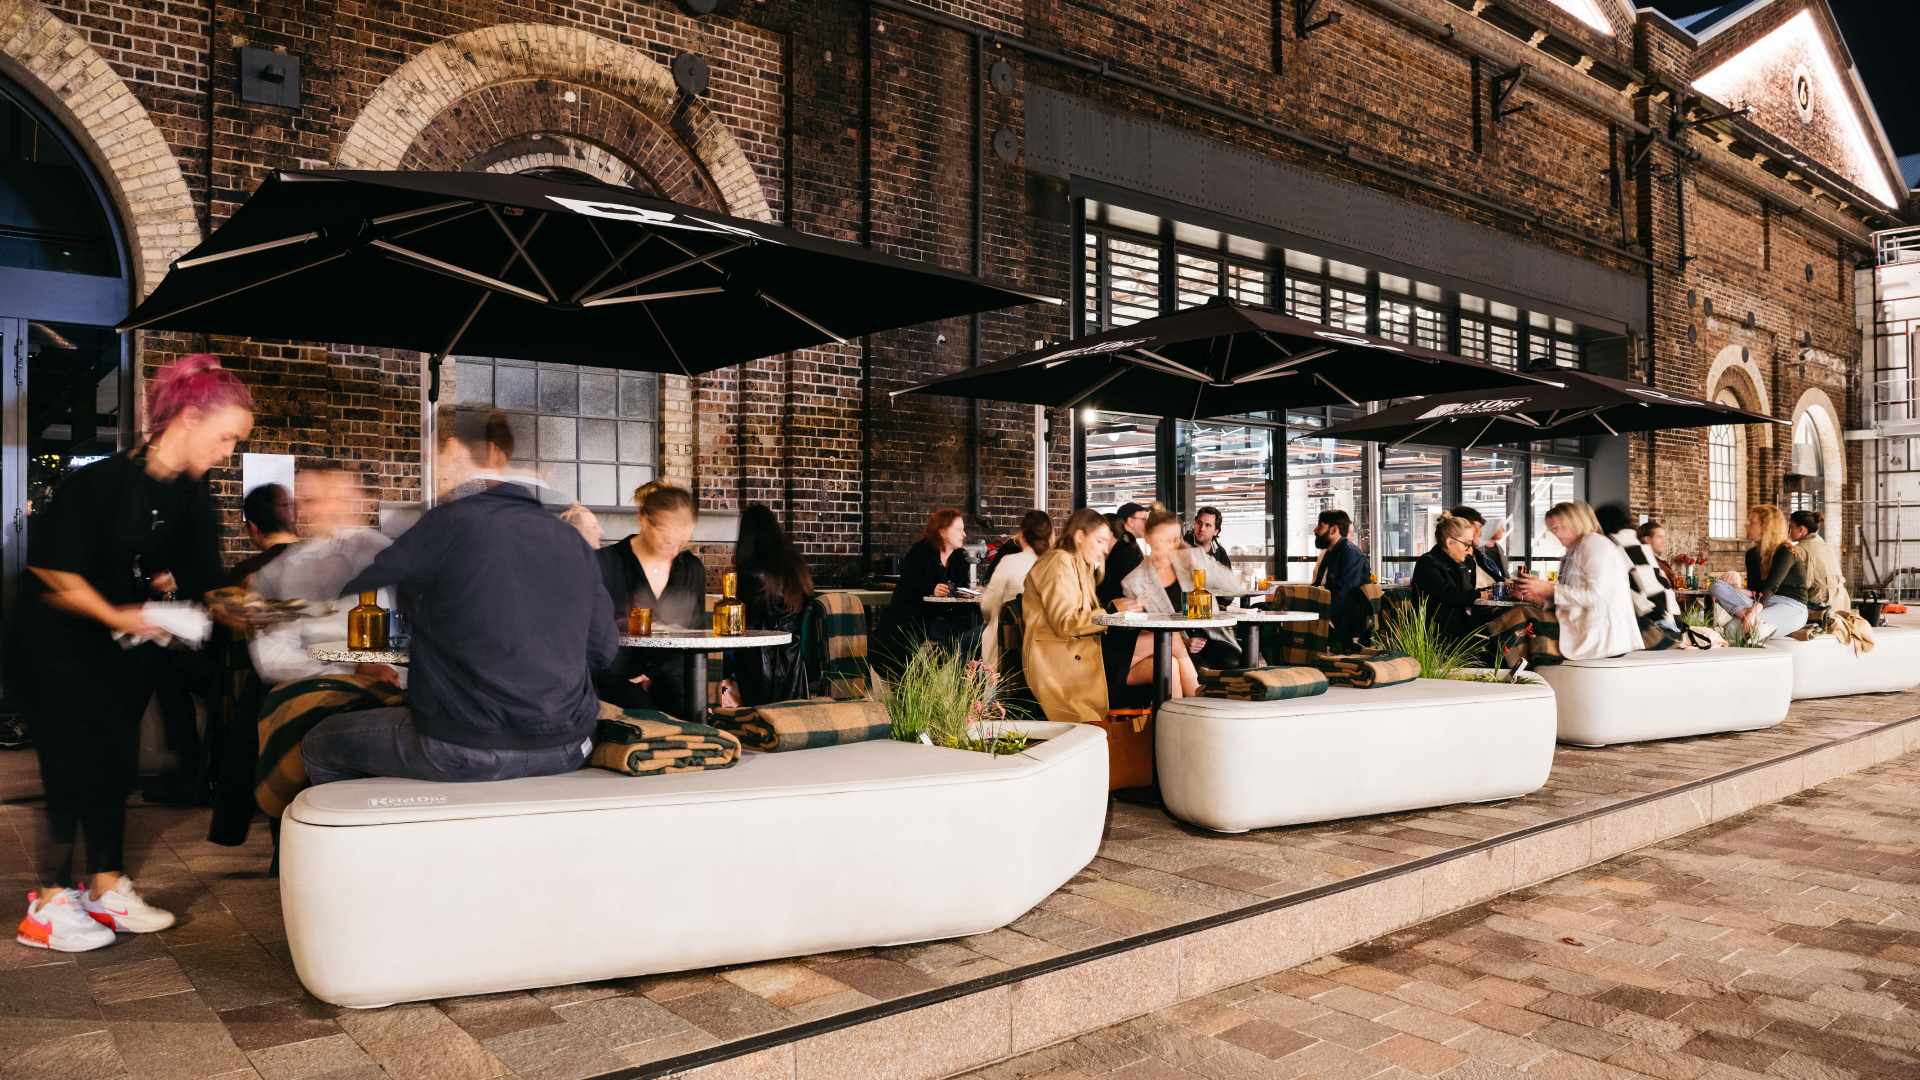 Sustainability-Focused Bar Re- Has Launched a Cocktail Menu Made From the World's Most Wasted Produce